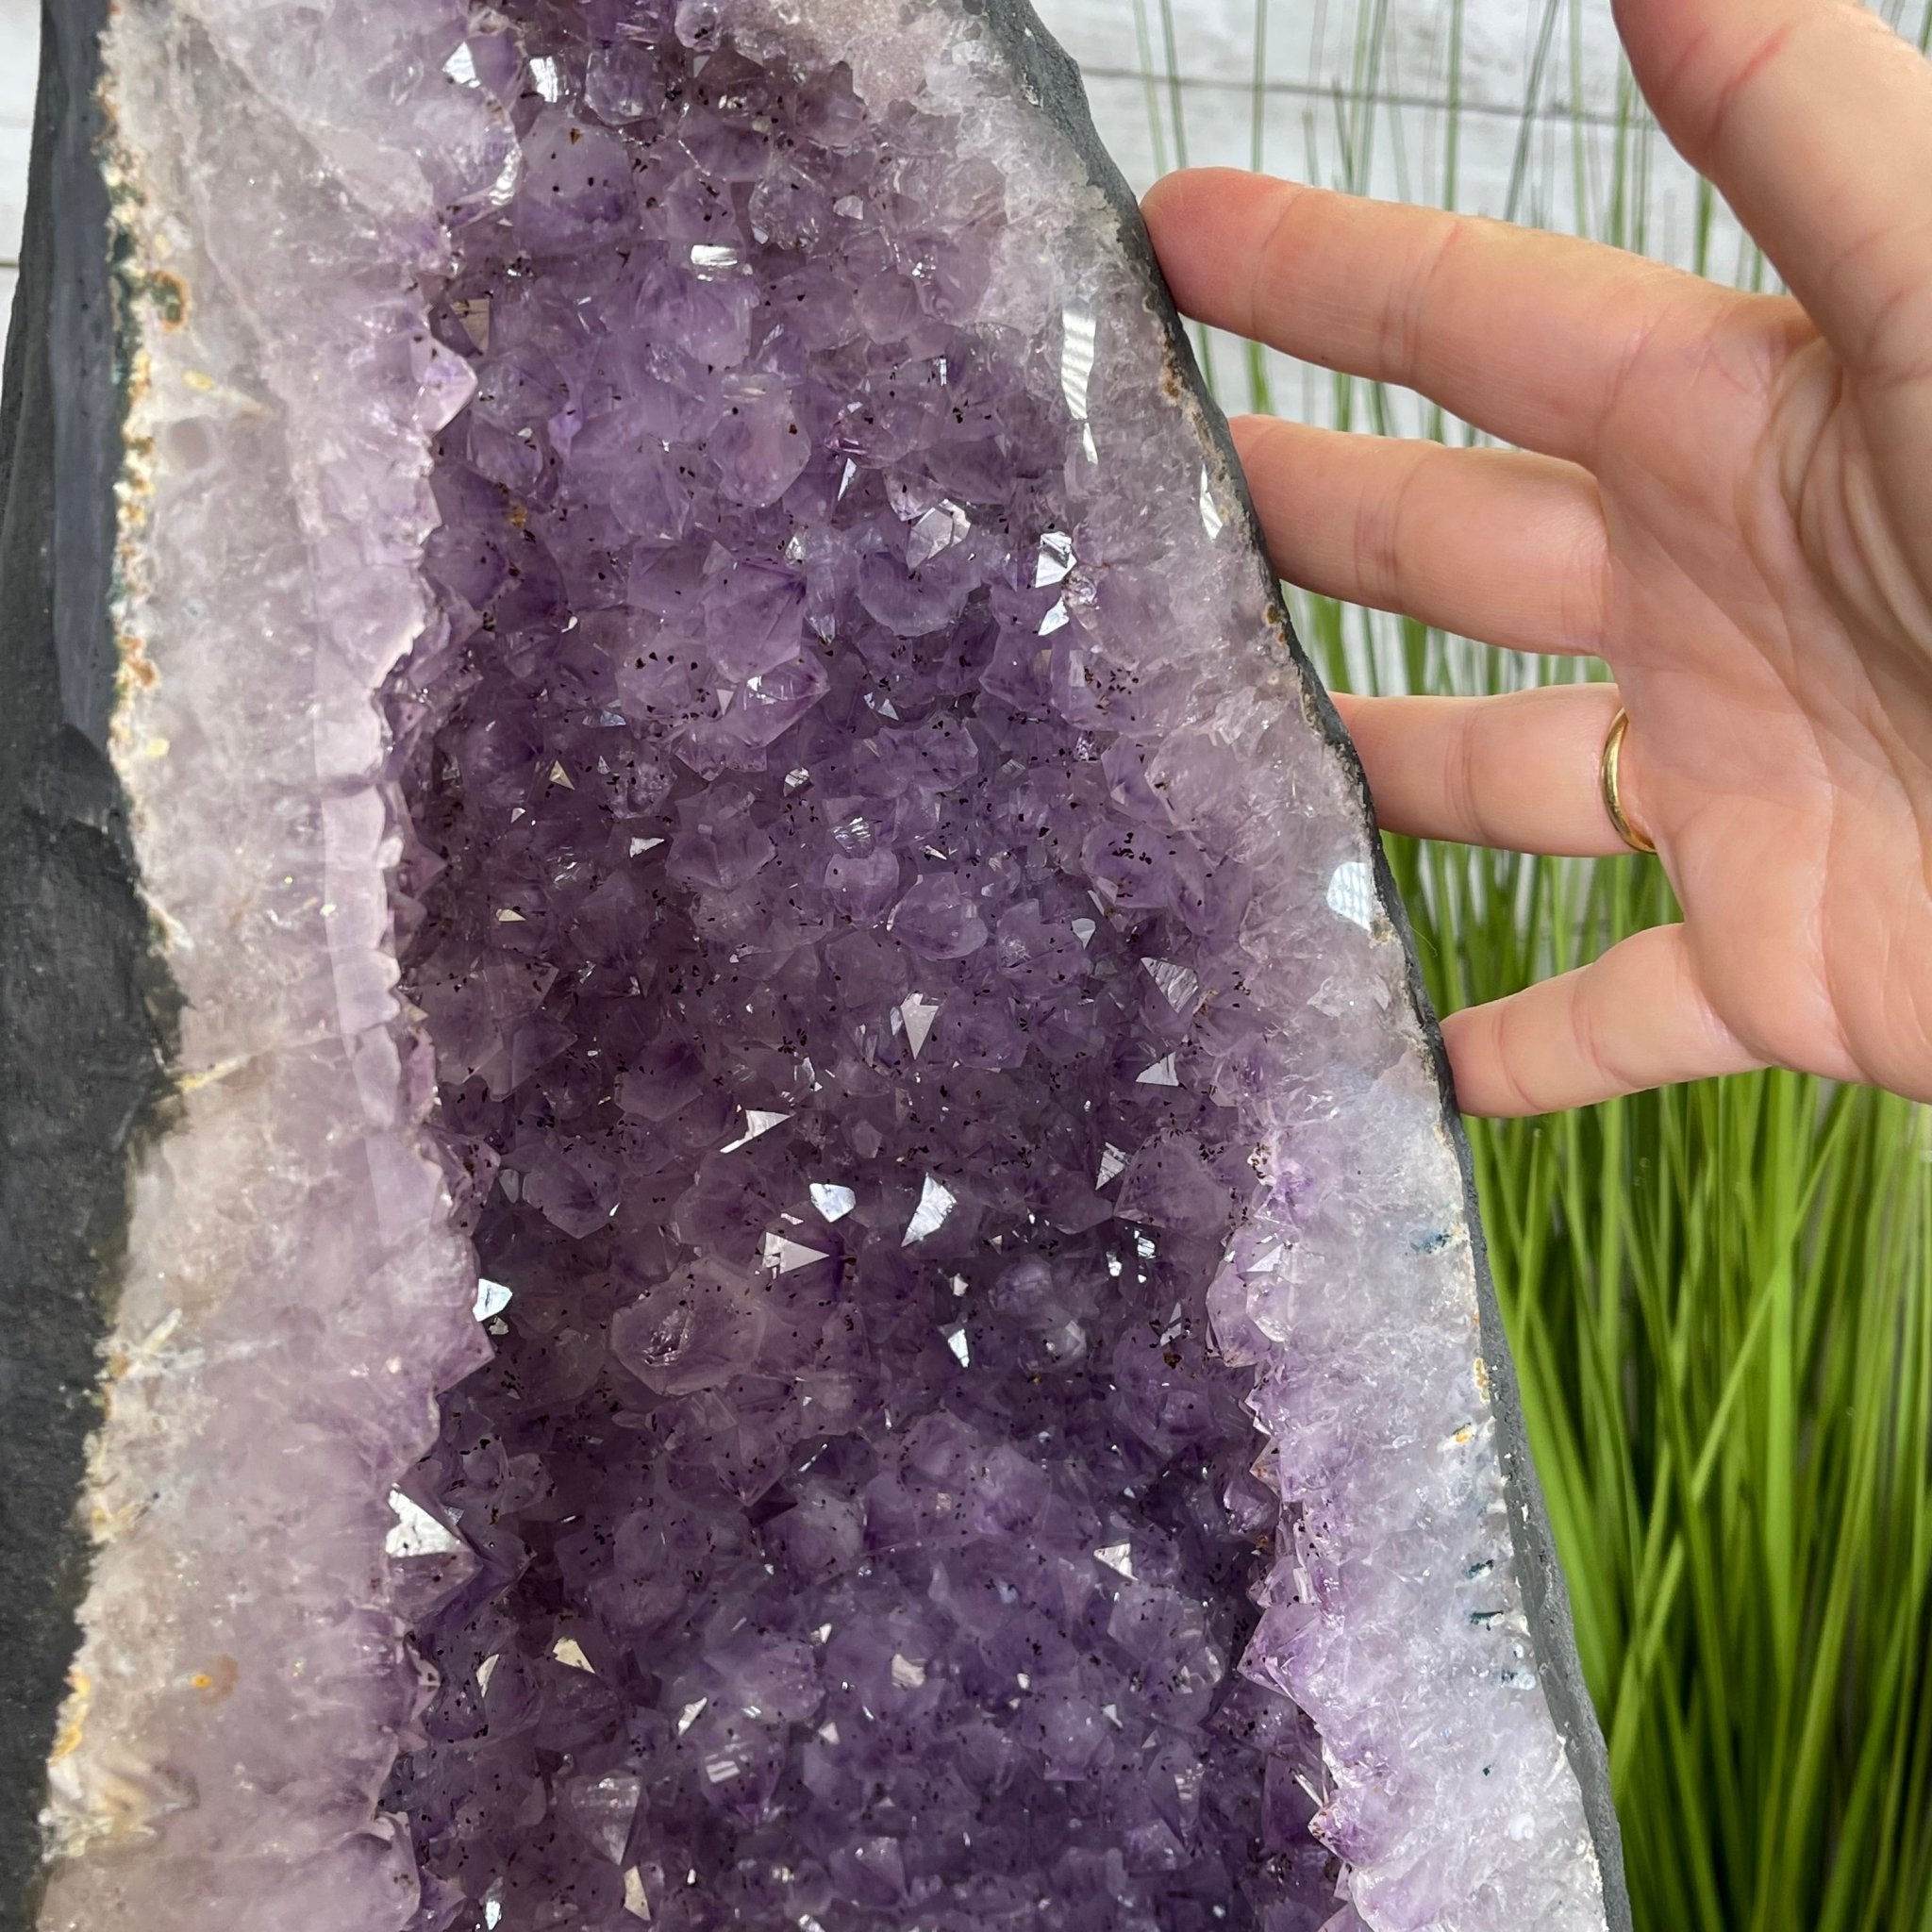 Large Standard Plus Quality Brazilian Amethyst Cathedral, 204 lbs & 39.9" Tall #5601-1180 by Brazil Gems - Brazil GemsBrazil GemsLarge Standard Plus Quality Brazilian Amethyst Cathedral, 204 lbs & 39.9" Tall #5601-1180 by Brazil GemsCathedrals5601-1180